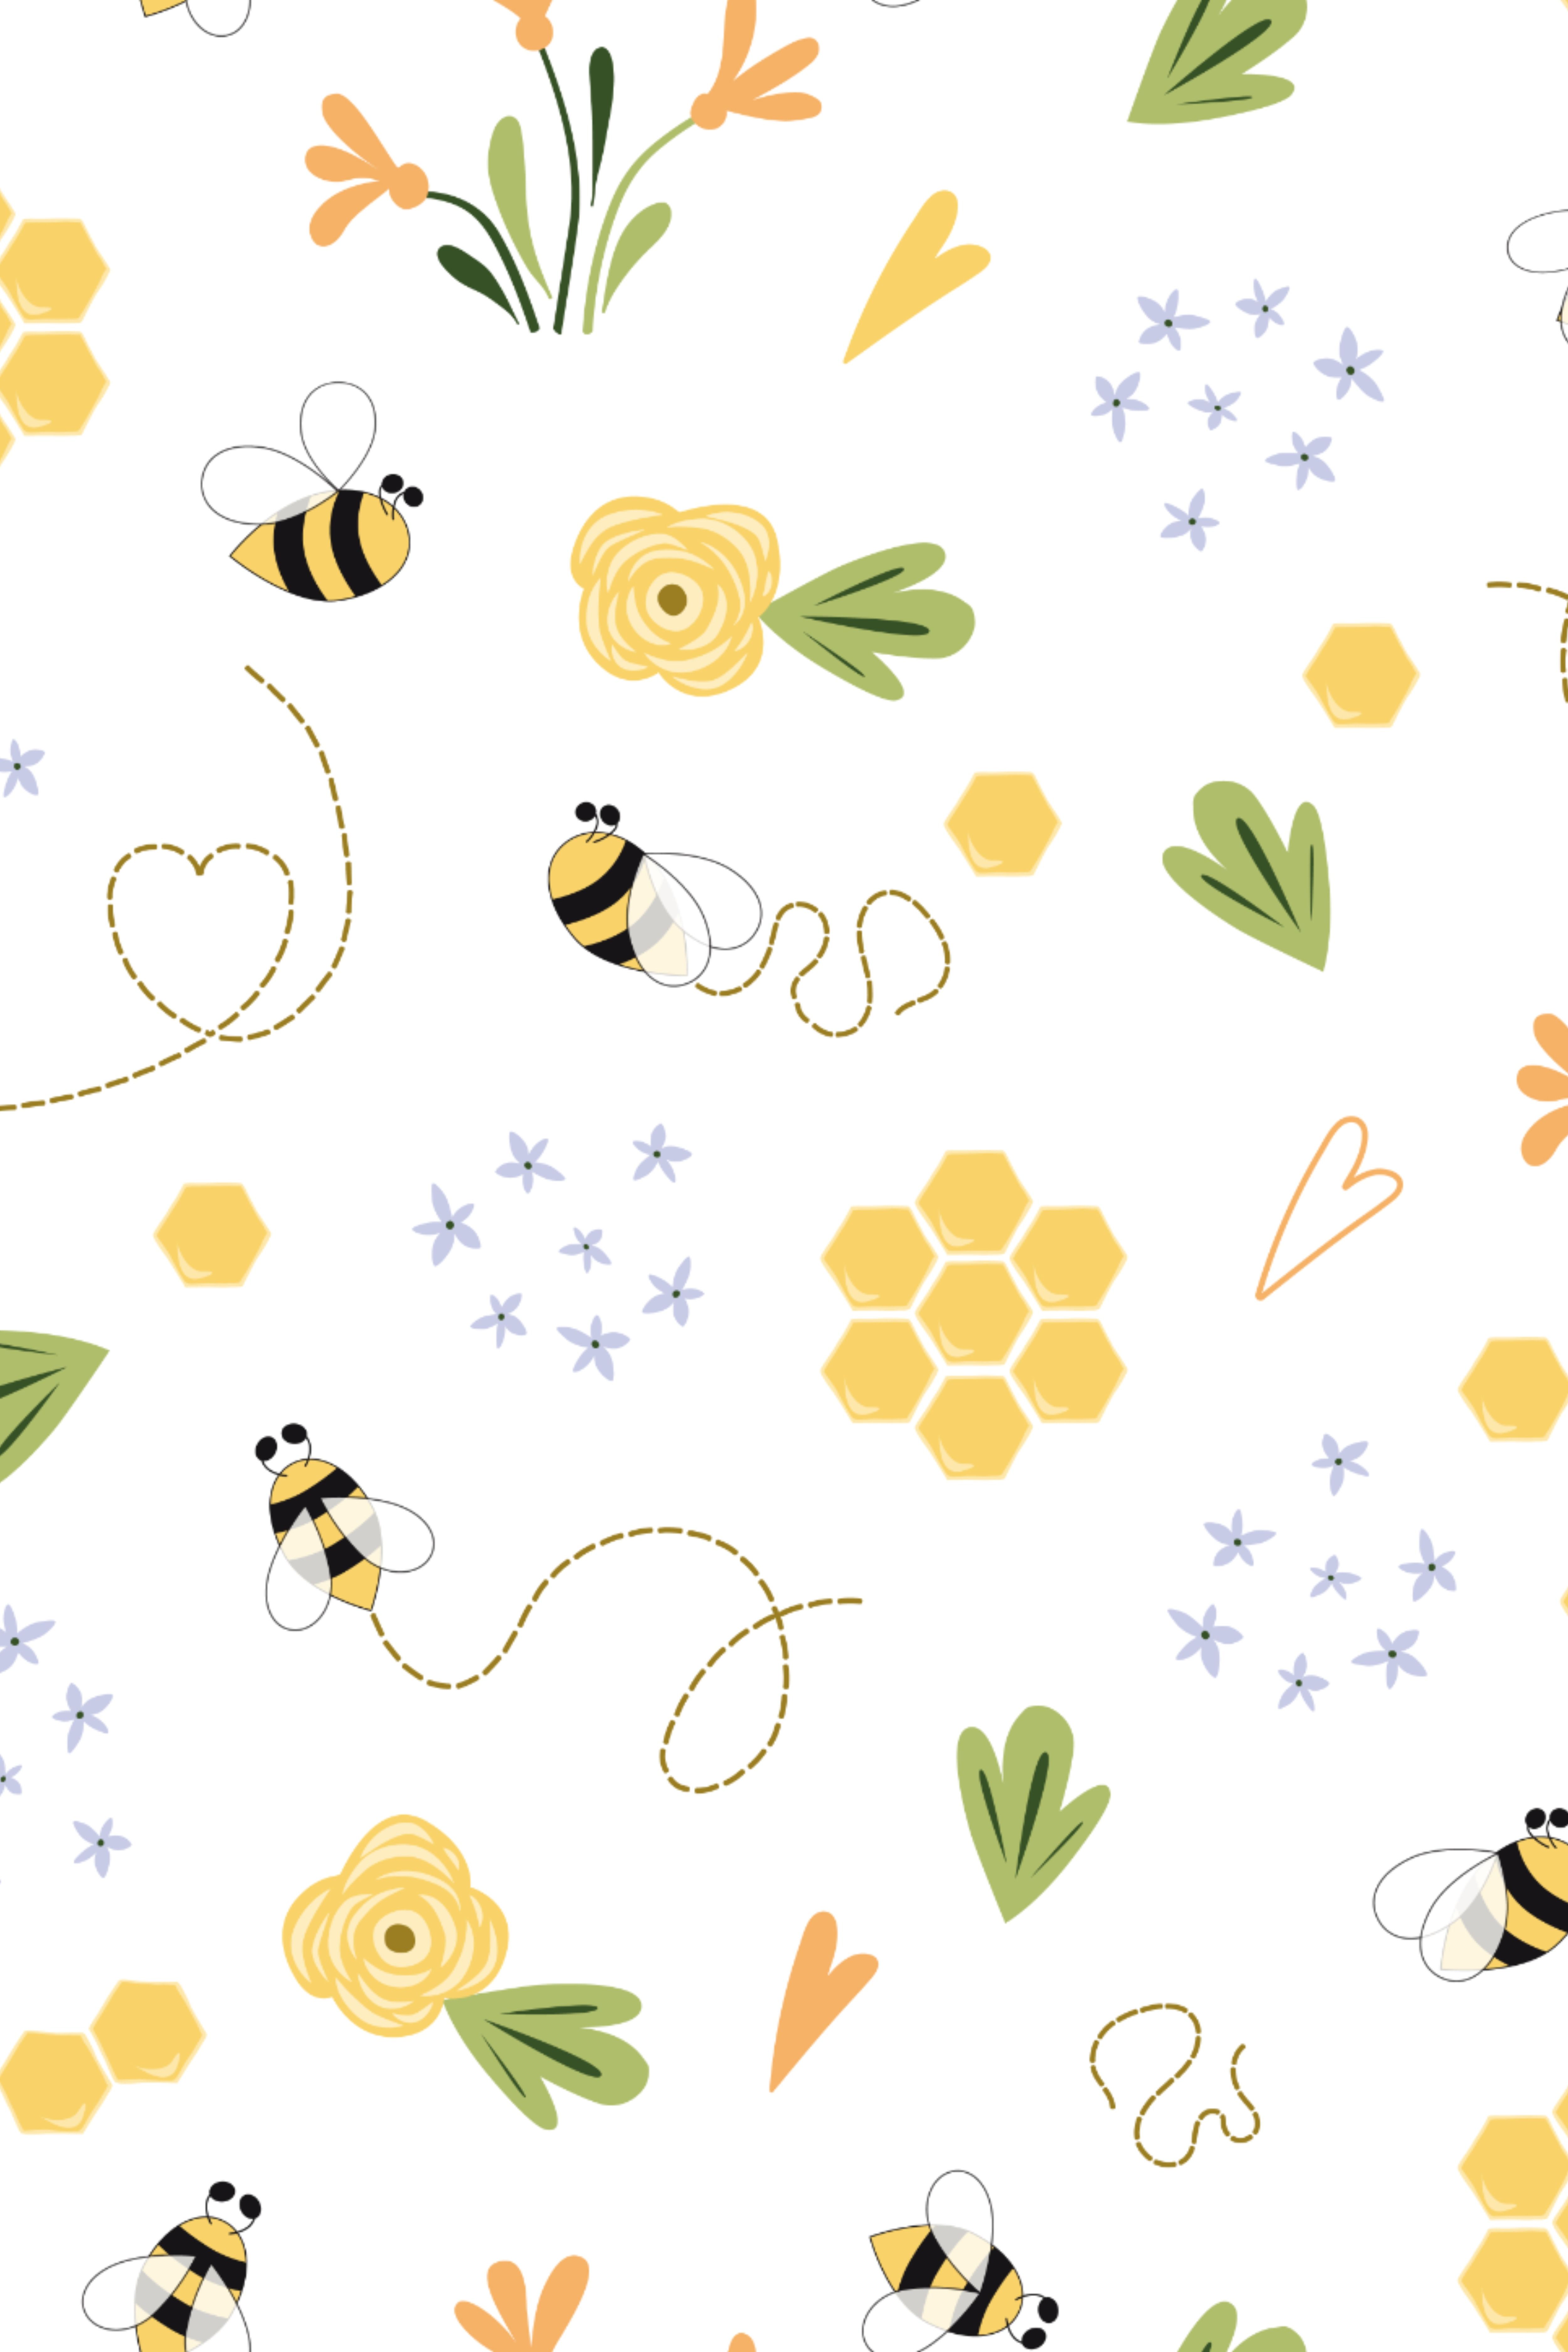 A pattern of bees, flowers, and honeycombs - Honey, bee